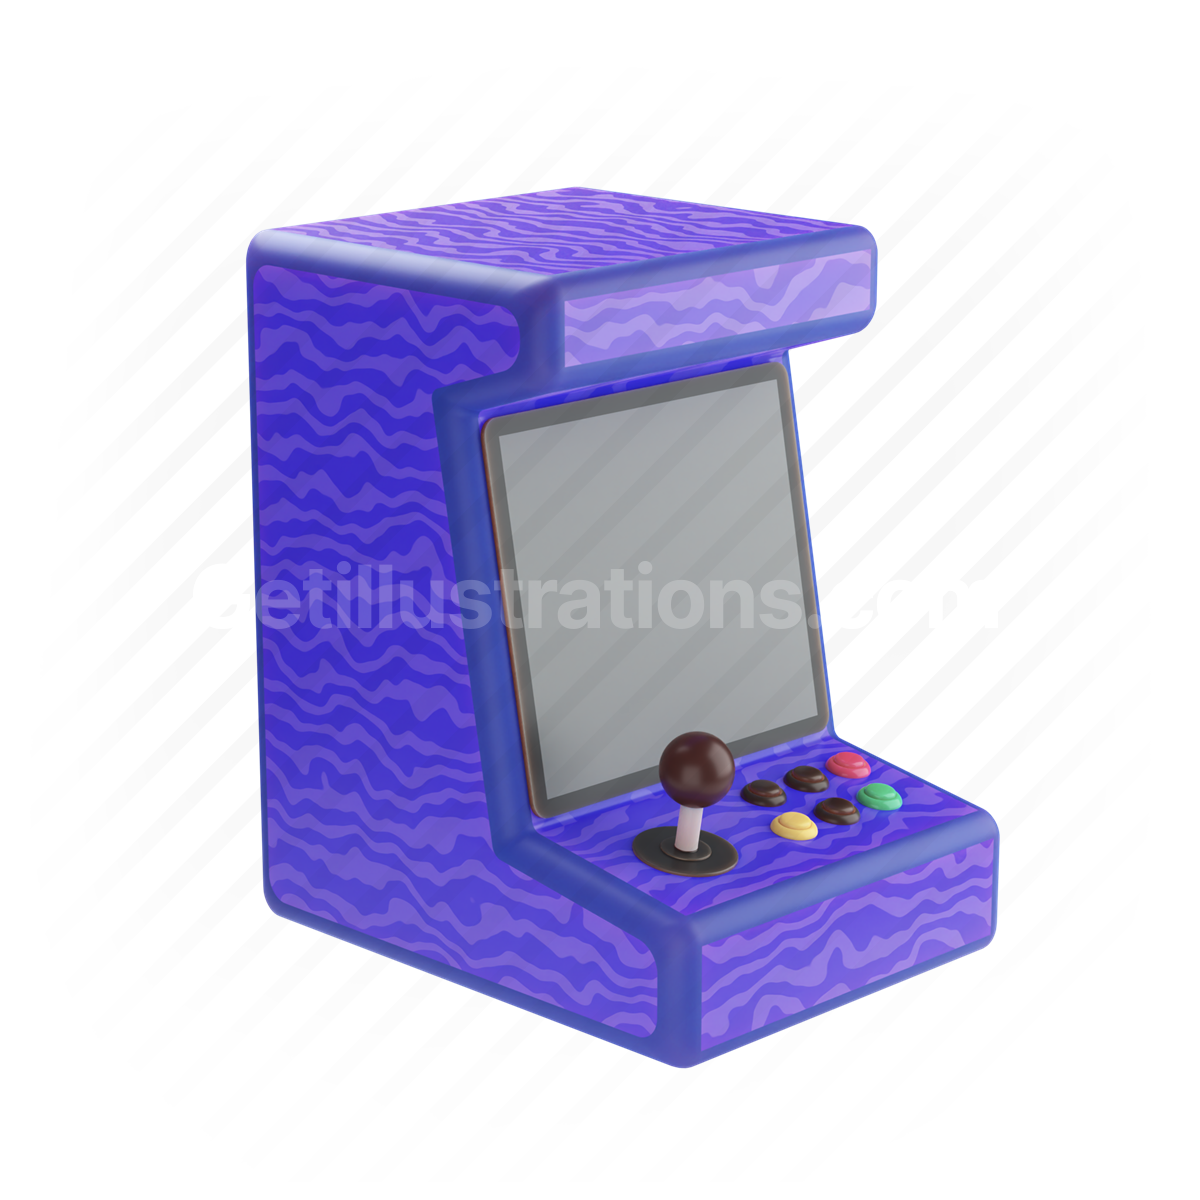 console, arcade, game, gaming, video game, hardware, screen, controller